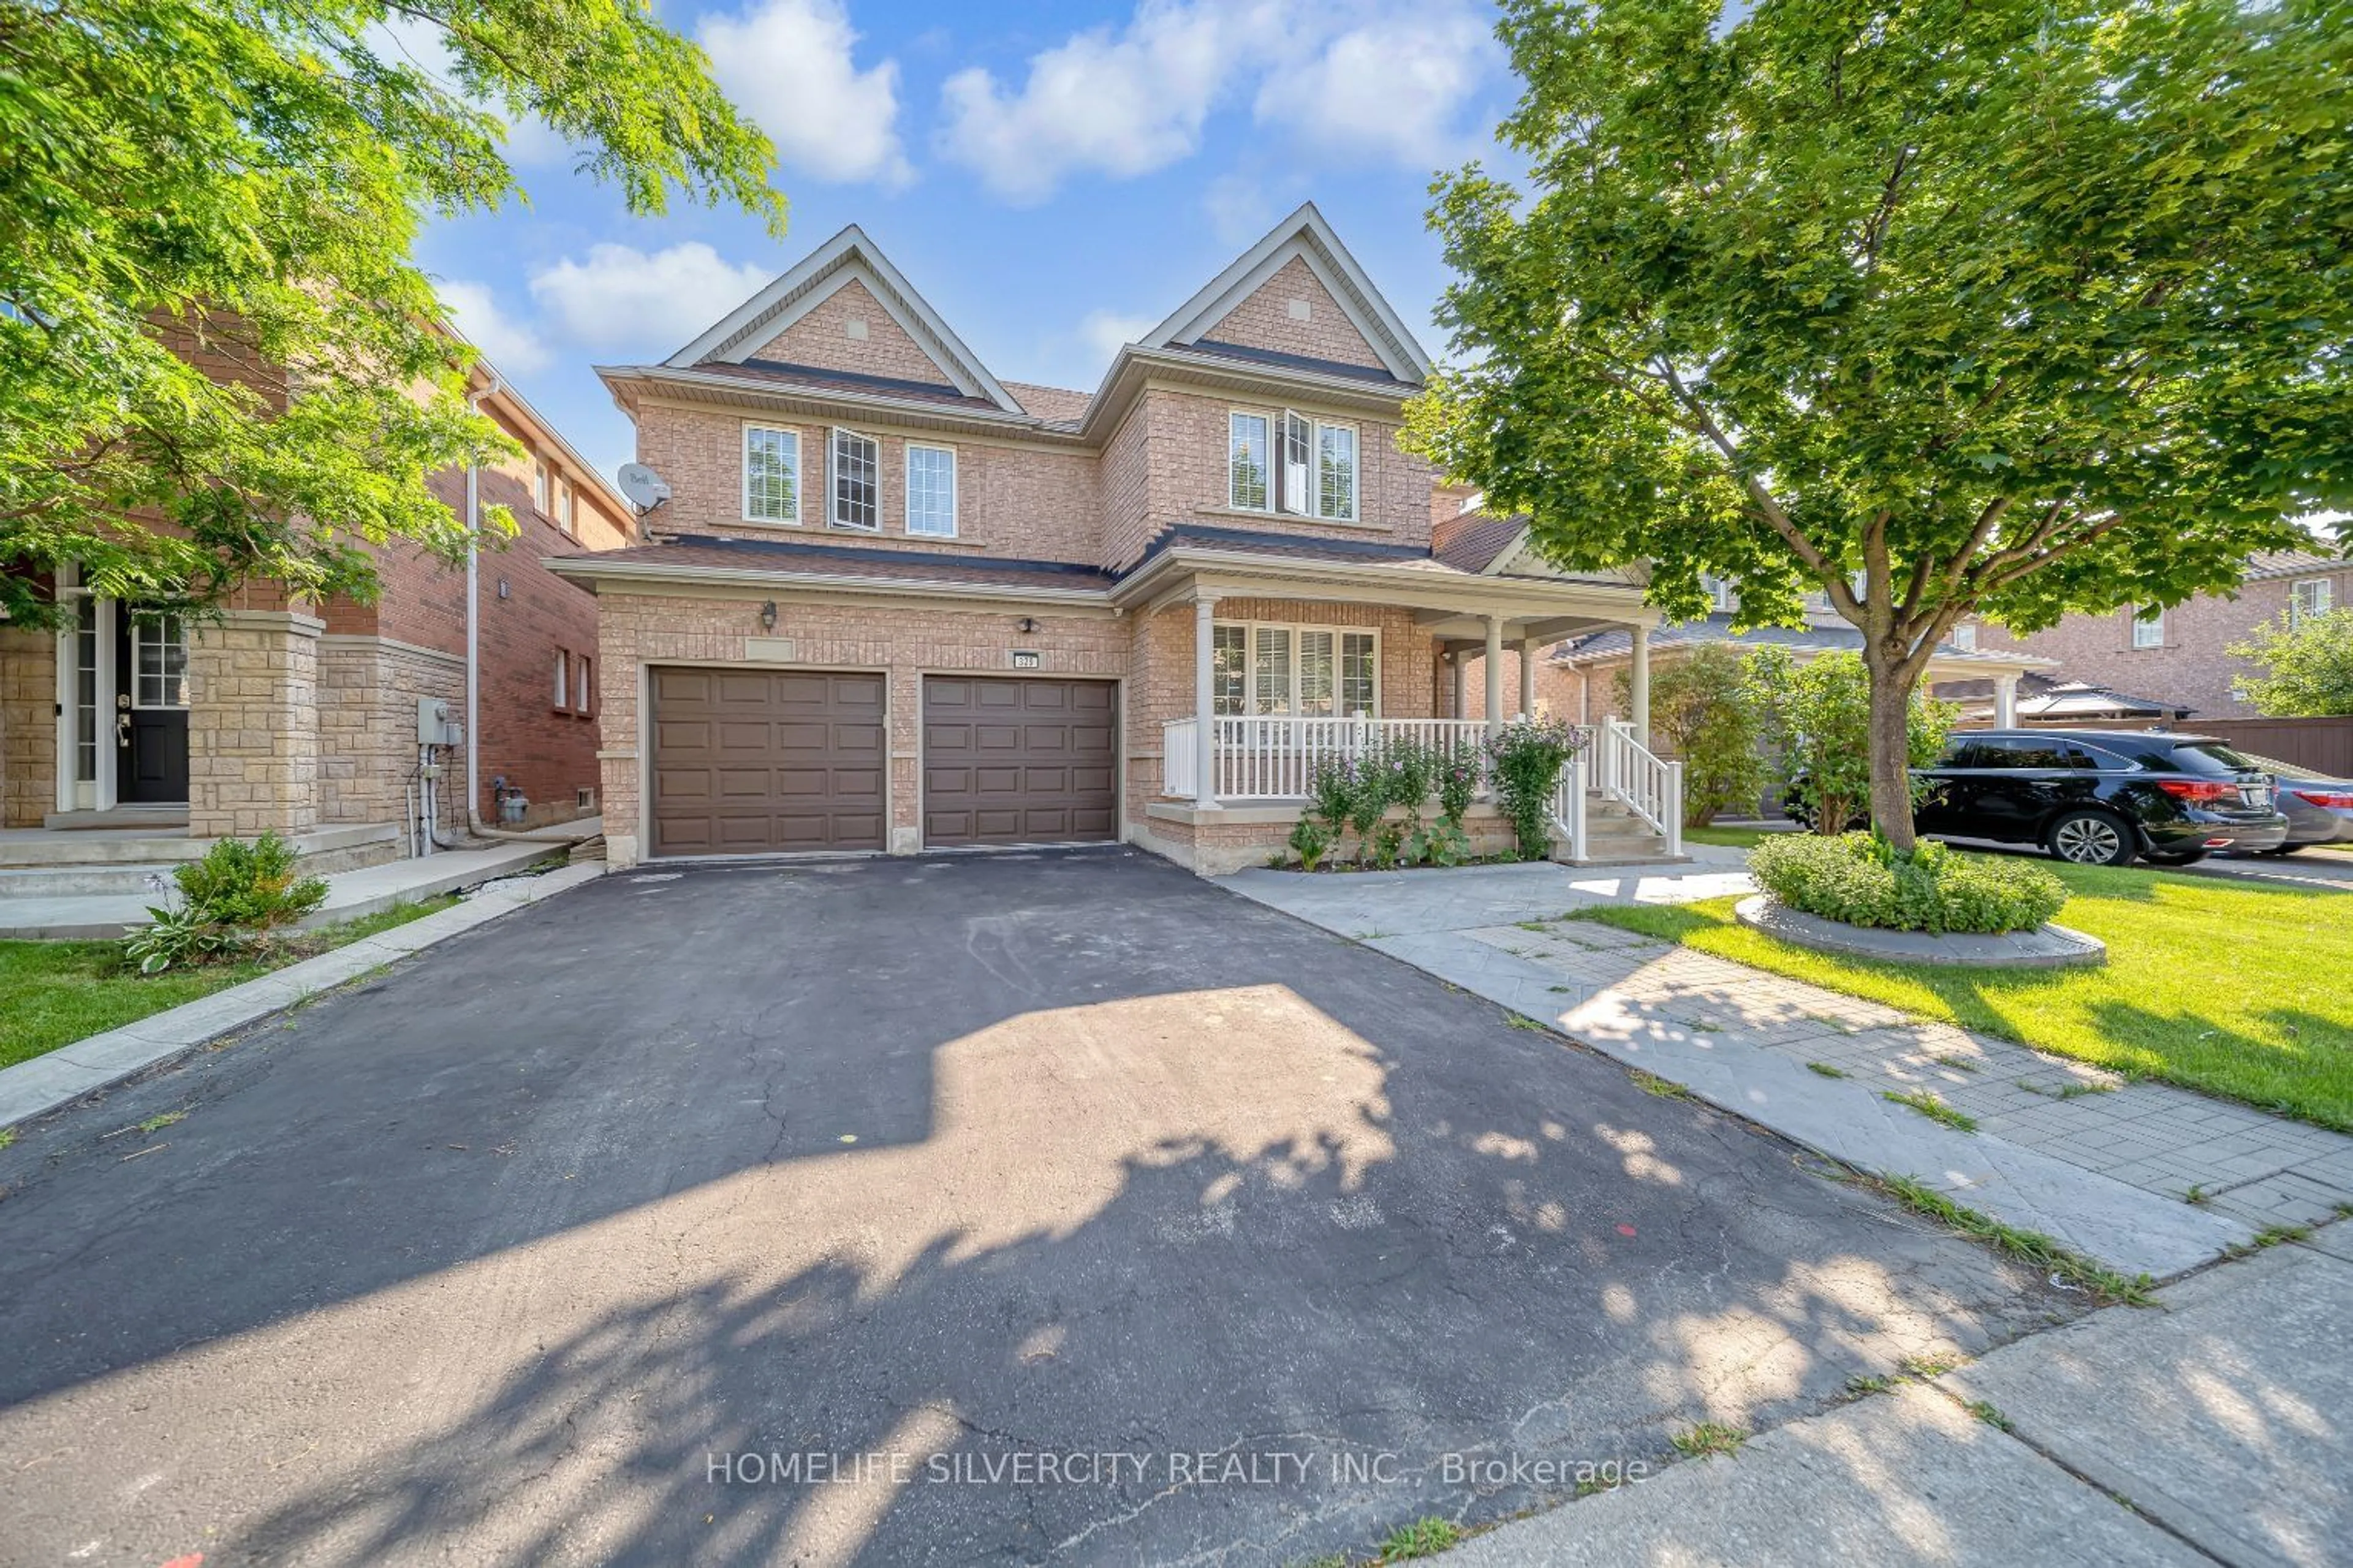 Home with brick exterior material for 329 Brisdale Dr, Brampton Ontario L7A 3C1